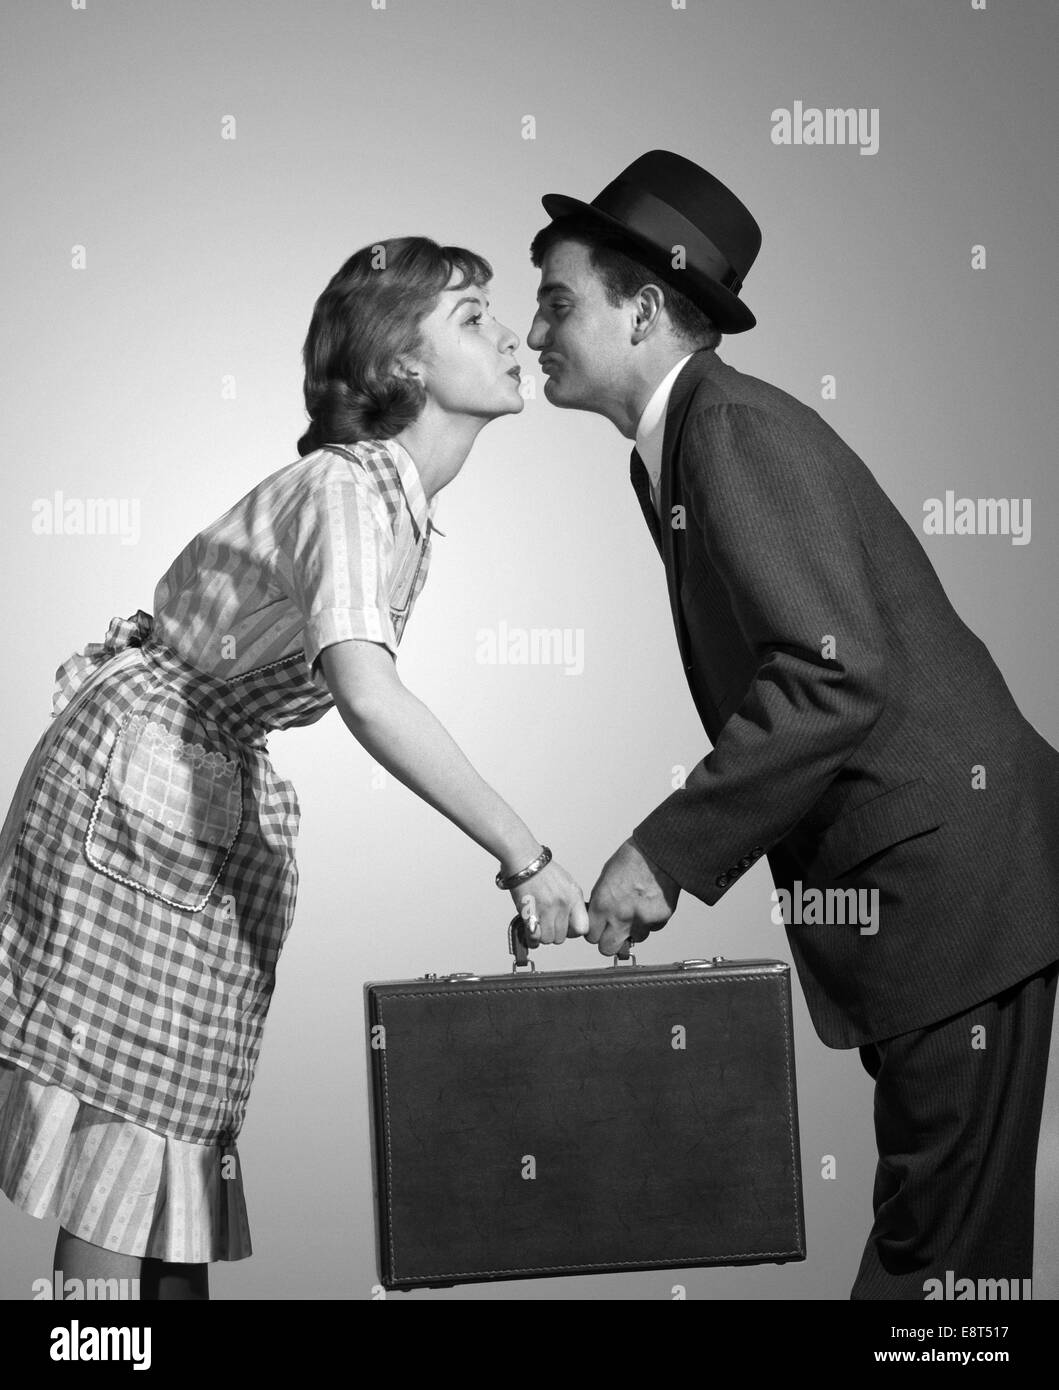 1950s 1960s HOMEMAKER WIFE IN CHECKED APRON KISSING BUSINESSMAN HUSBAND IN SUIT HAT AND TIE AS SHE HANDS HIM A BRIEFCASE Stock Photo